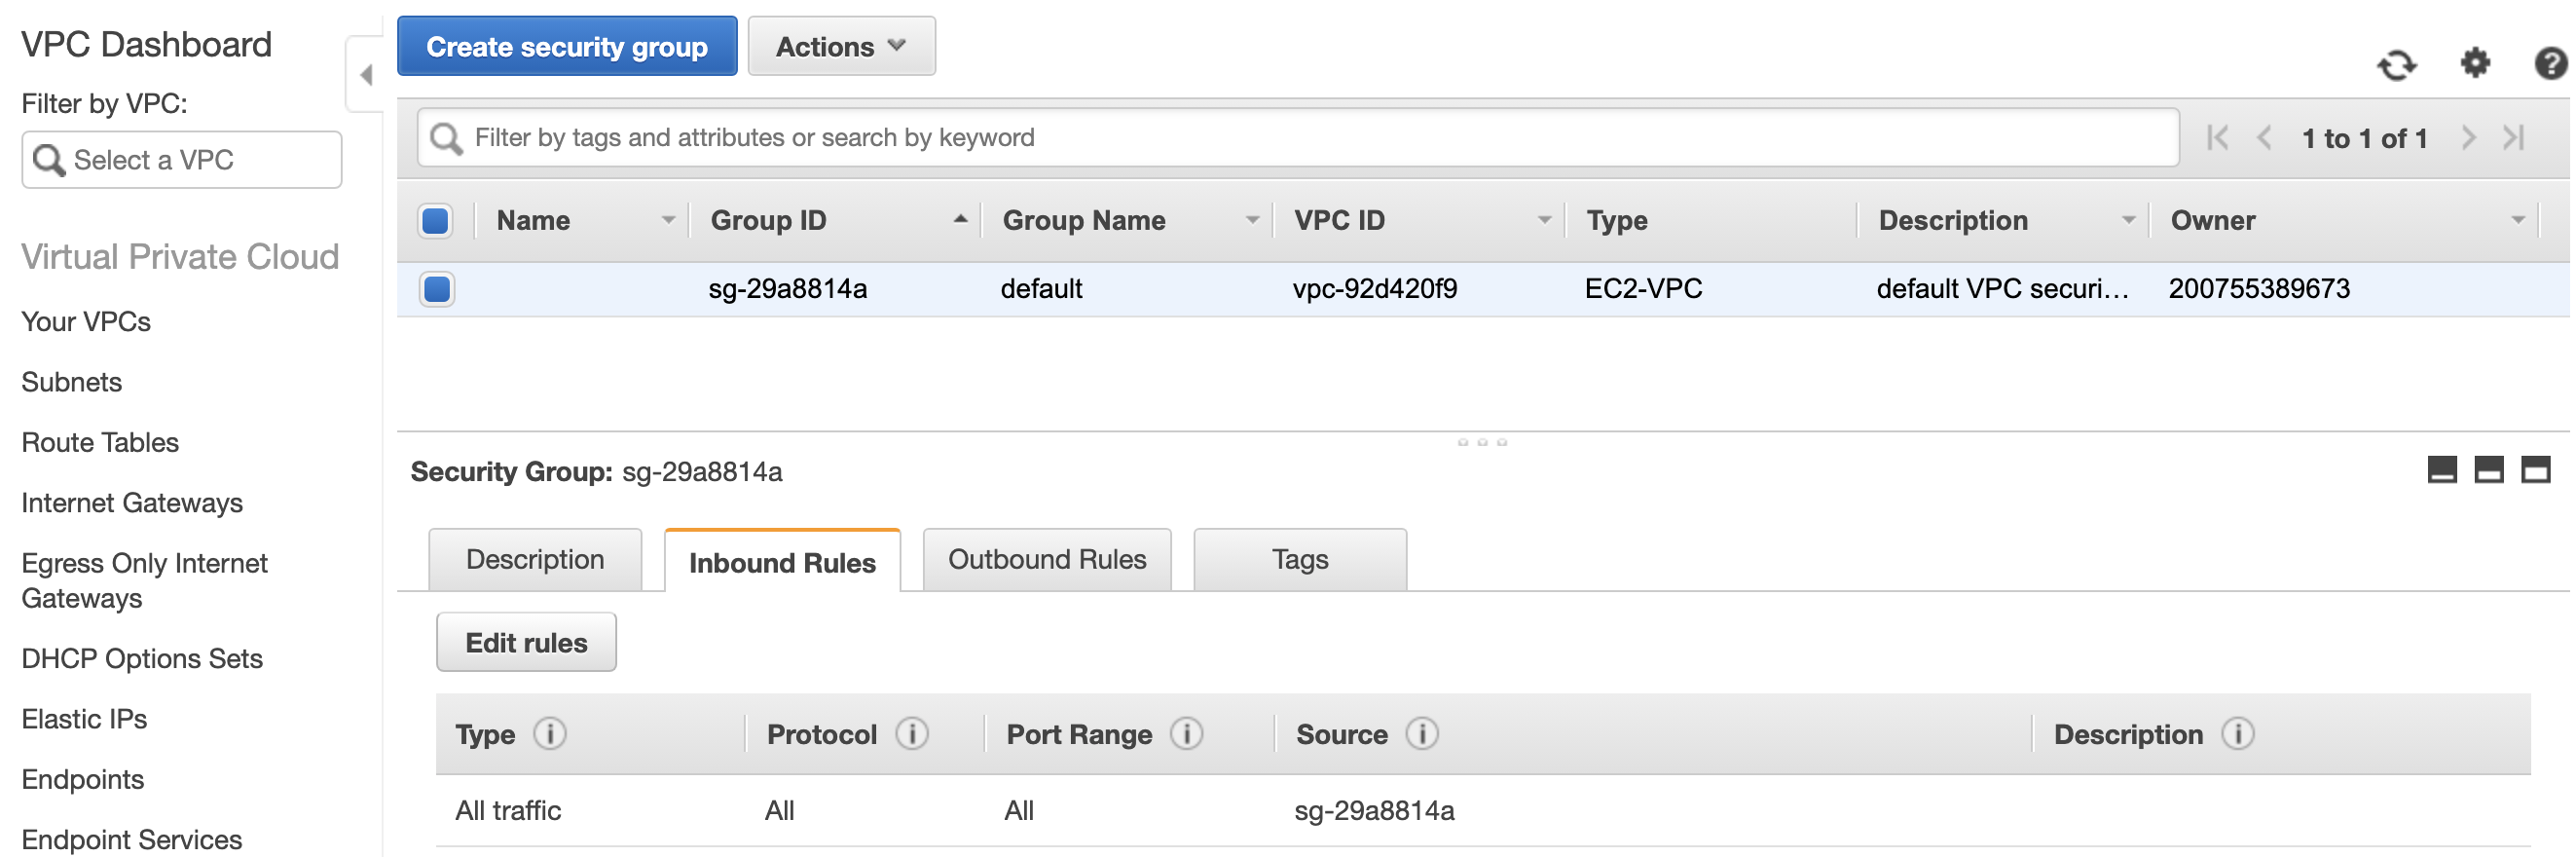 Virtual Private Cloud (VPC) Security Groups